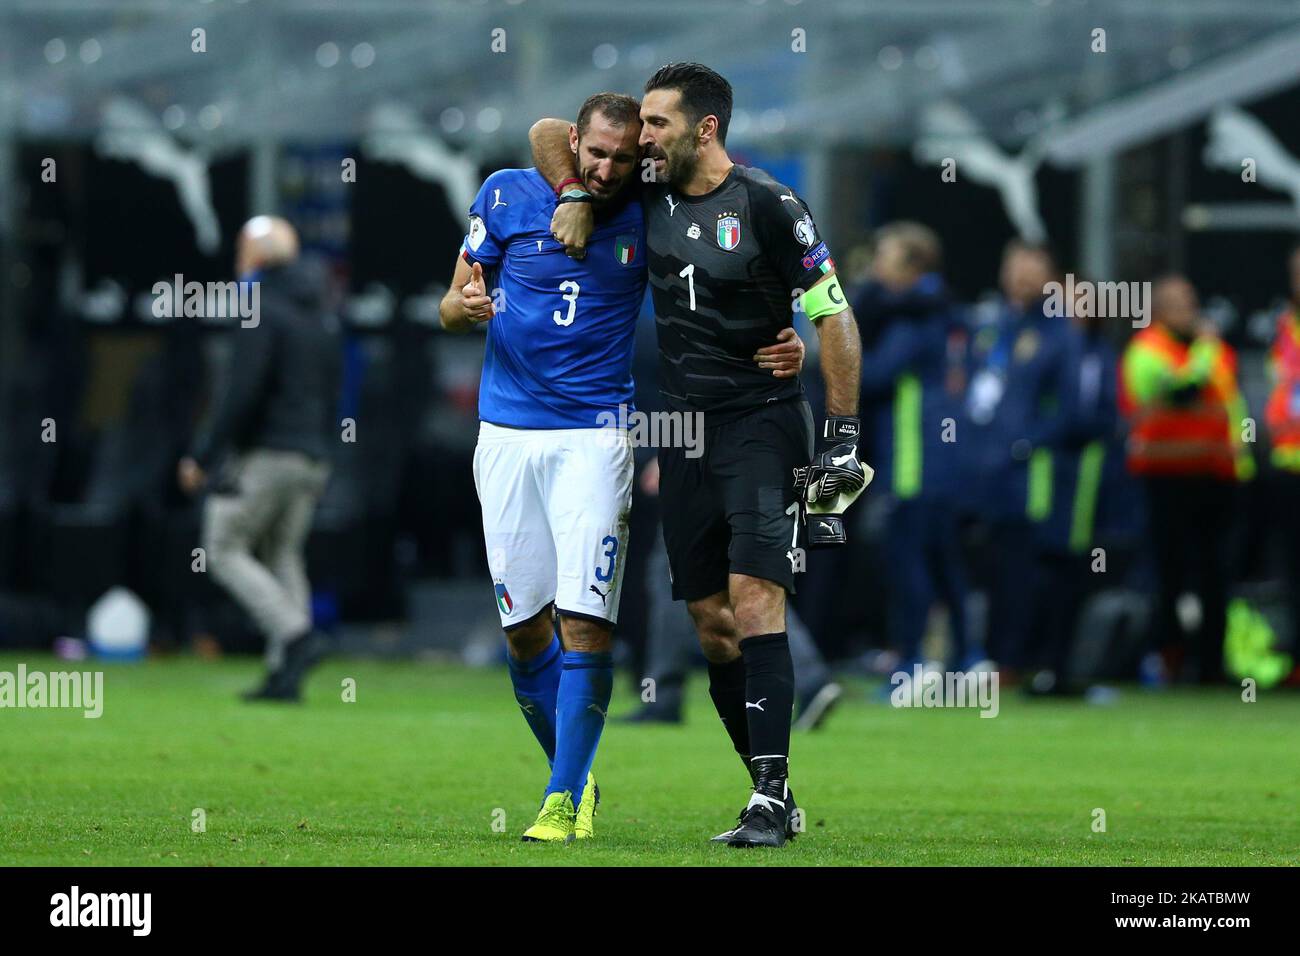 FIFA World Cup Qualifiers play-off Switzerland v Northern Ireland Giorgio Chiellini and Gianluigi Buffon of Italy crying at the end of at San Siro Stadium in Milan, Italy on November 13, 2017. (Photo by Matteo Ciambelli/NurPhoto)  Stock Photo